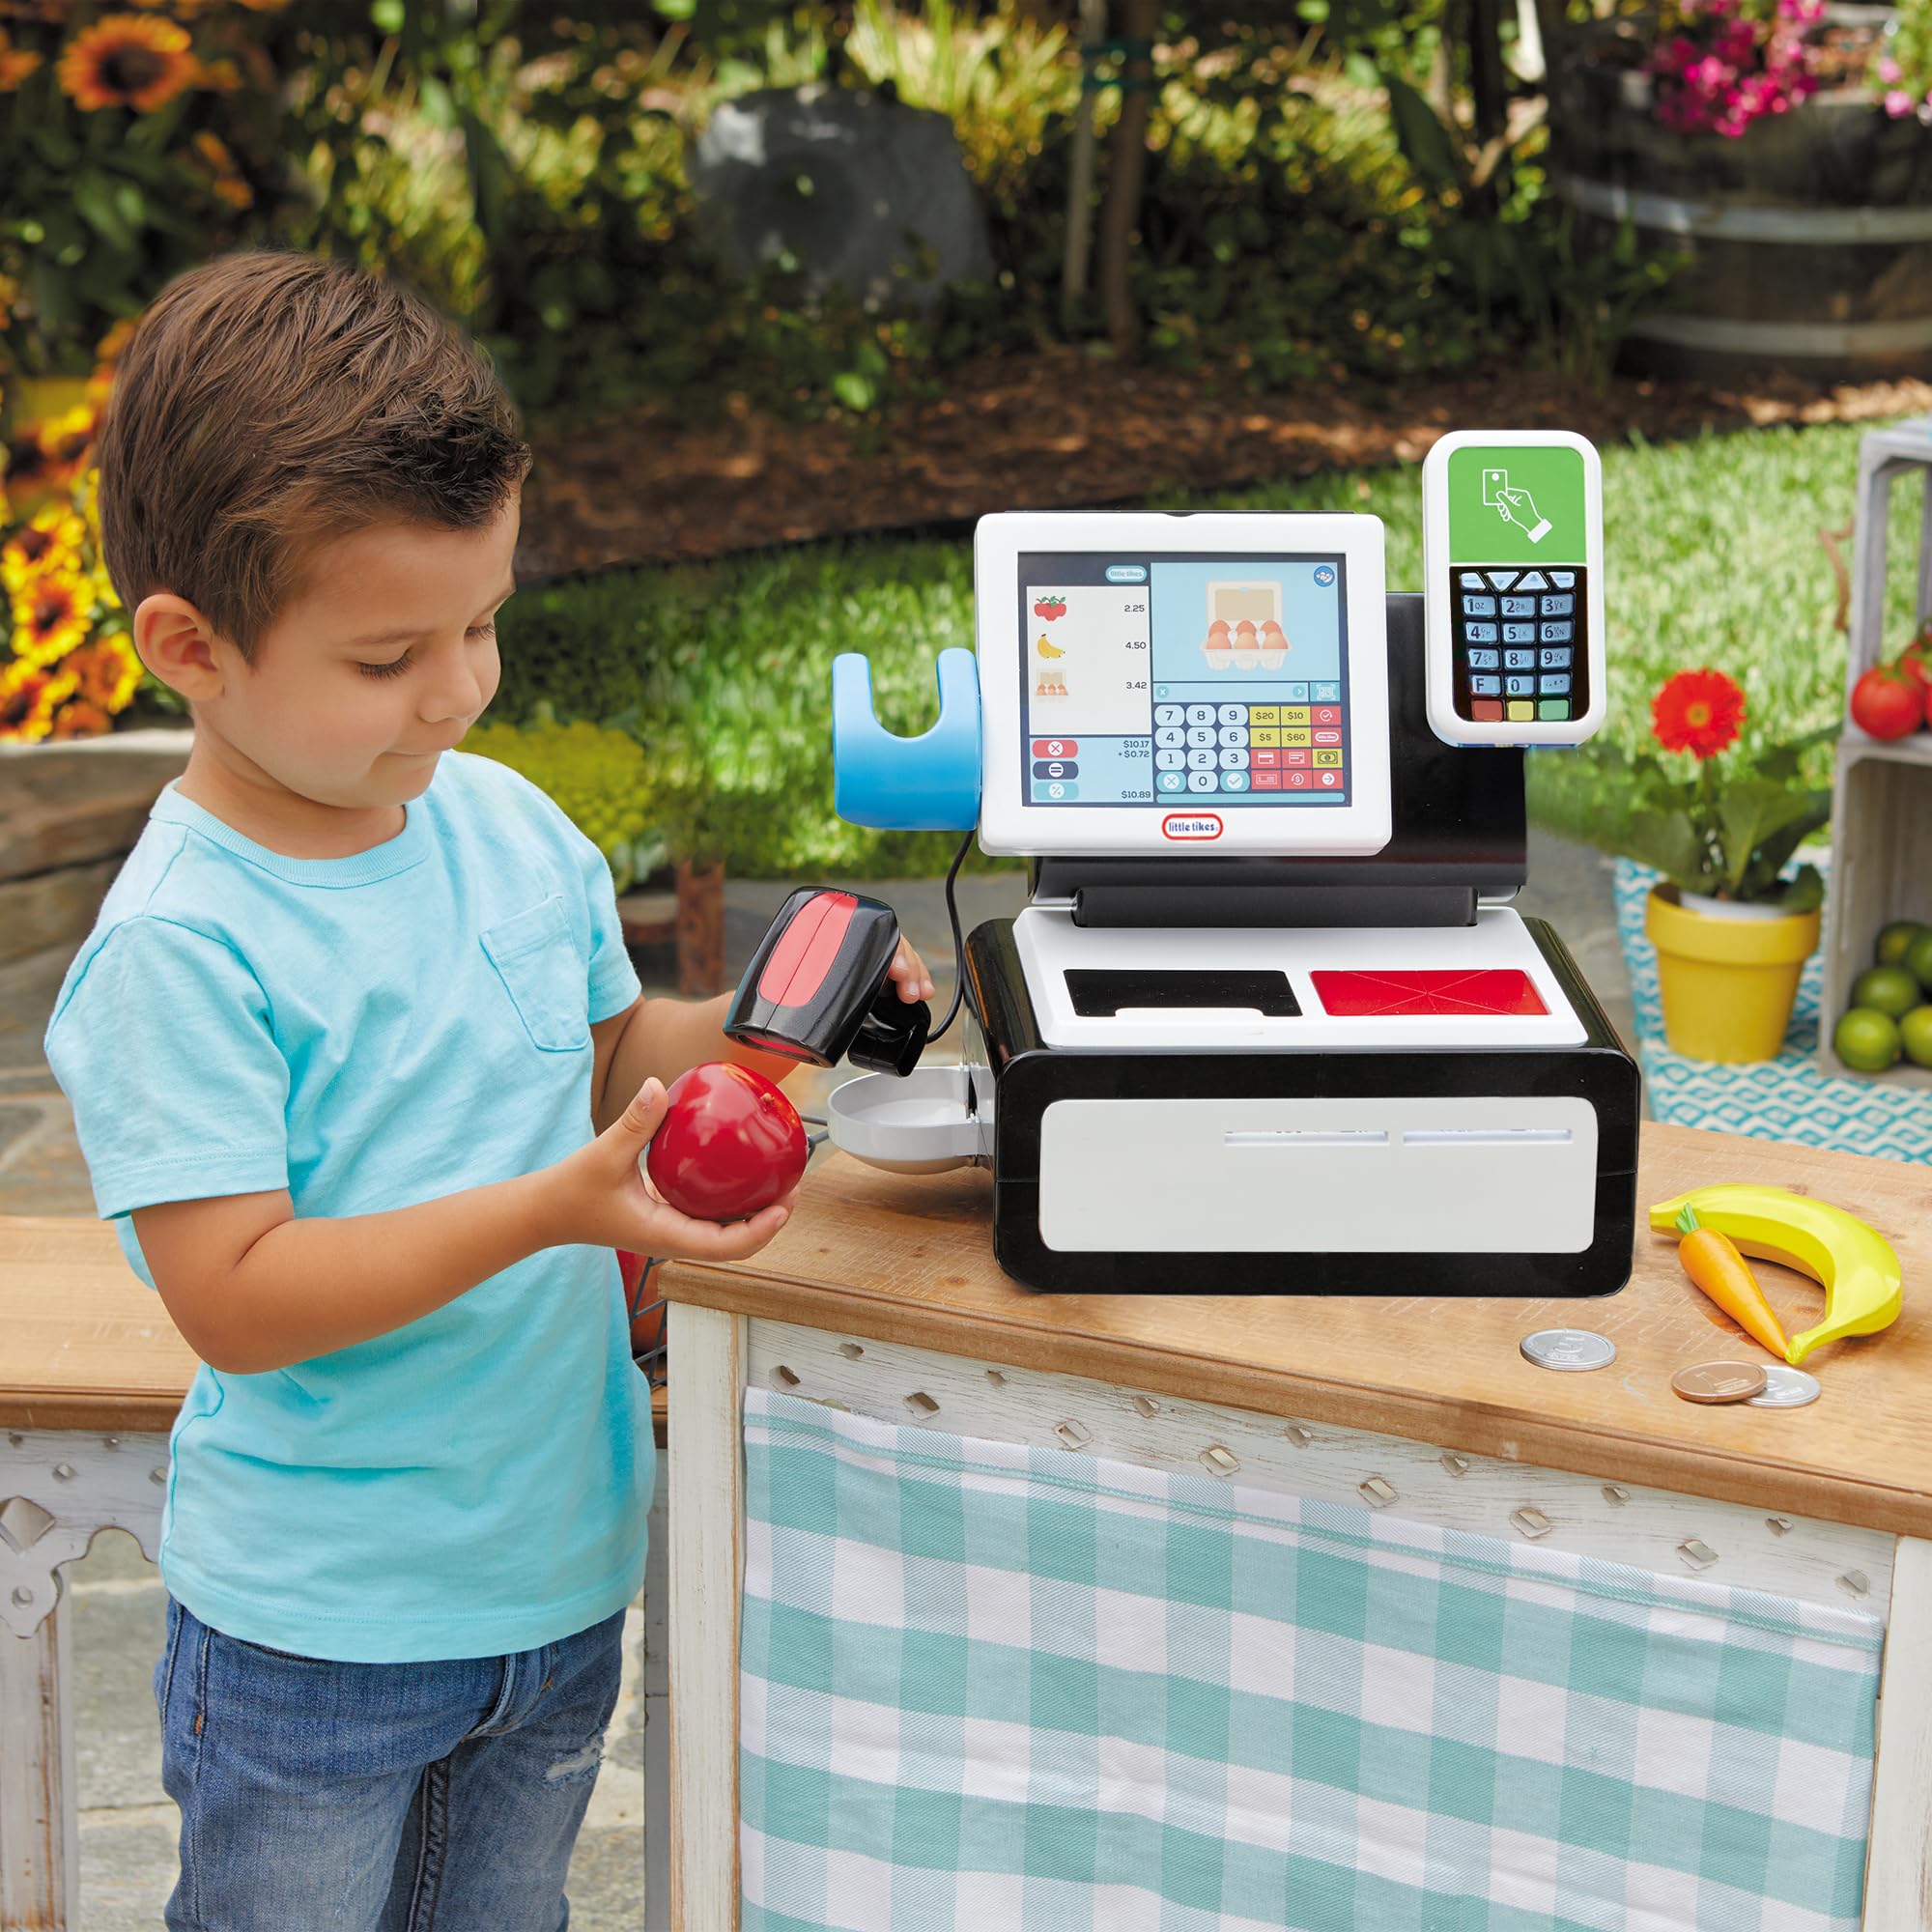 Little Tikes First Self-Checkout Stand Realistic Cash Register Pretend Play Toy for Kids